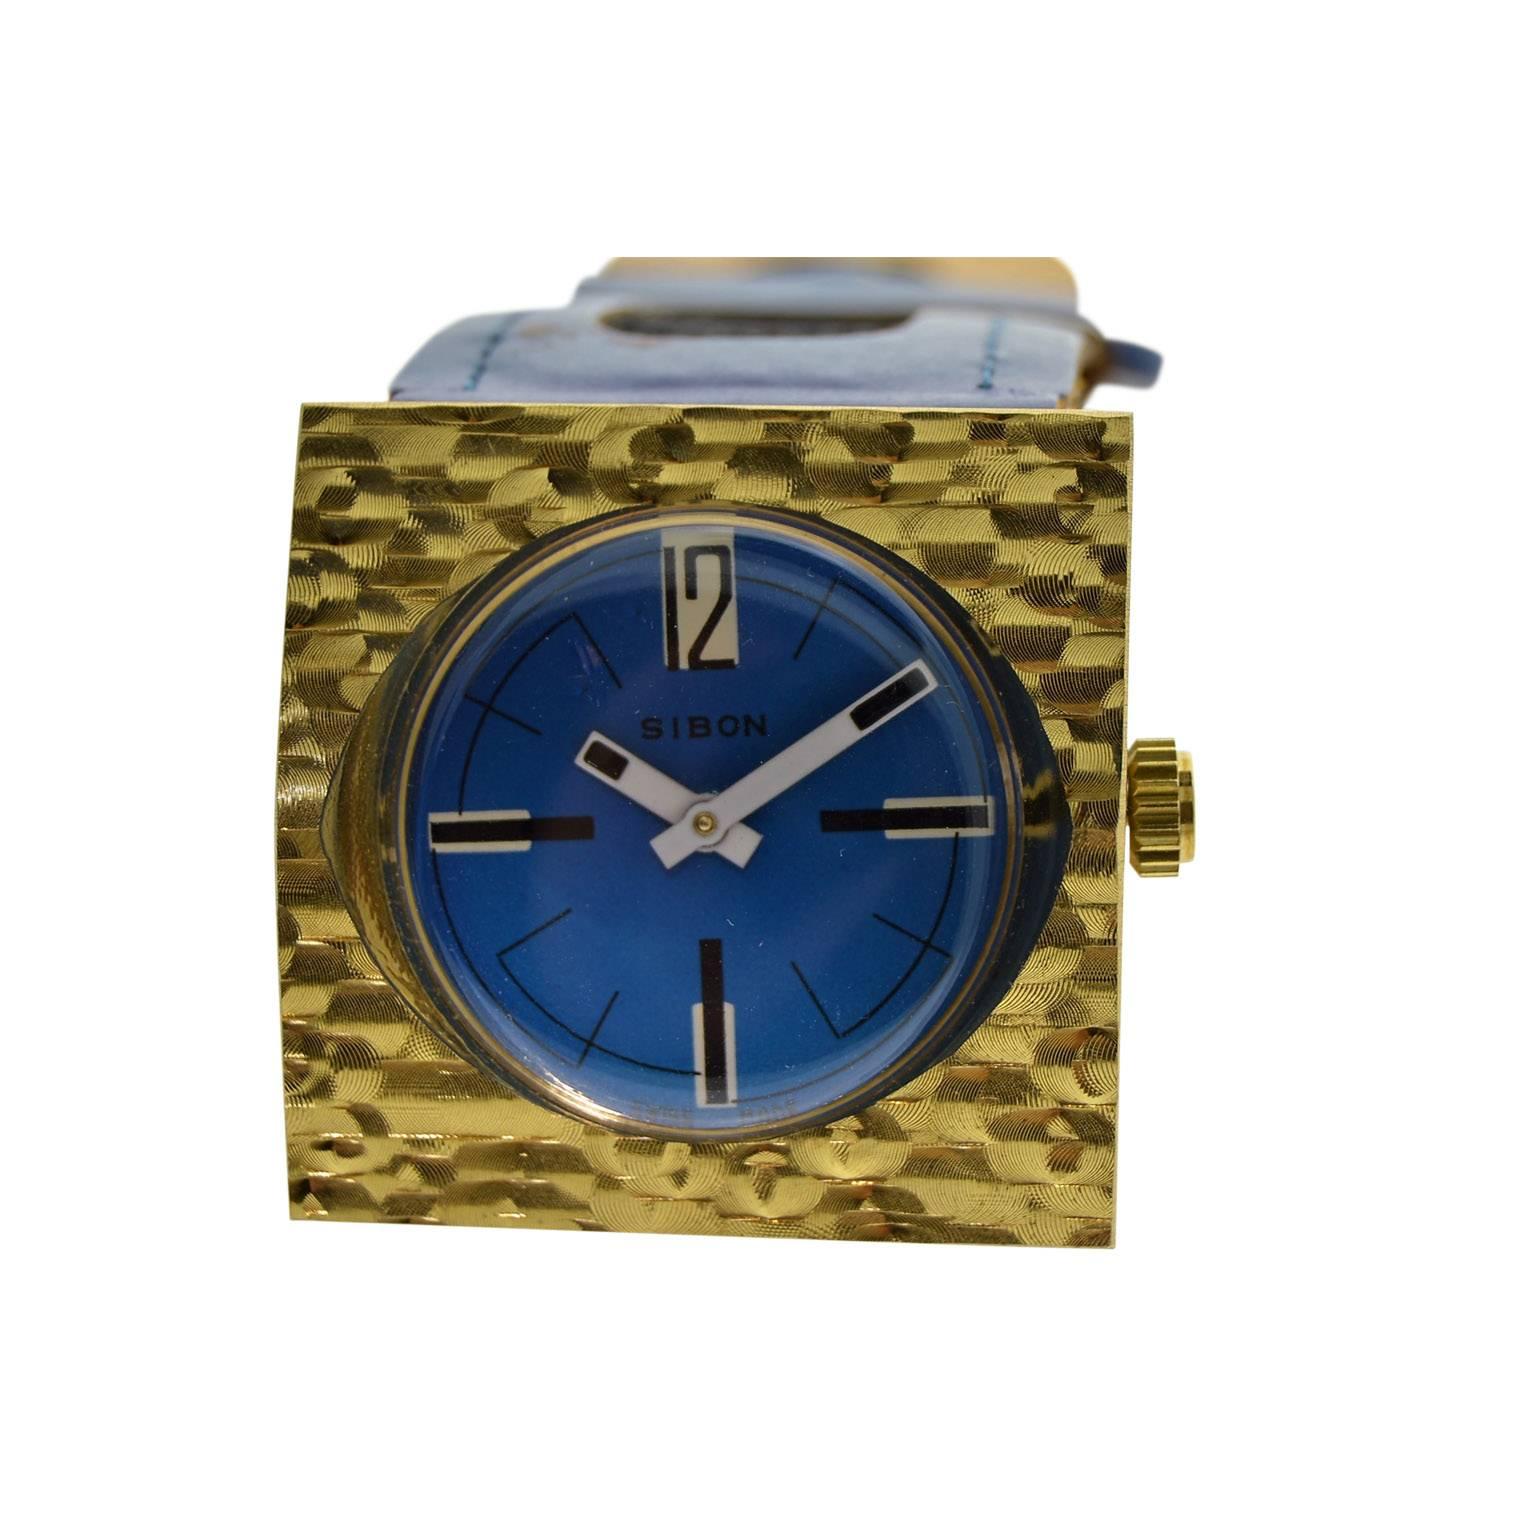 FACTORY / HOUSE: Sibon Watch Company / Swiss Made
STYLE / REFERENCE: Oversized Fashion 
METAL / MATERIAL: Bronze
CIRCA:1980
DIMENSIONS: 39mm X 39mm
MOVEMENT / CALIBER: Manual Winding 
DIAL / HANDS: Original Blued / Baton Hands
ATTACHMENT / LENGTH: